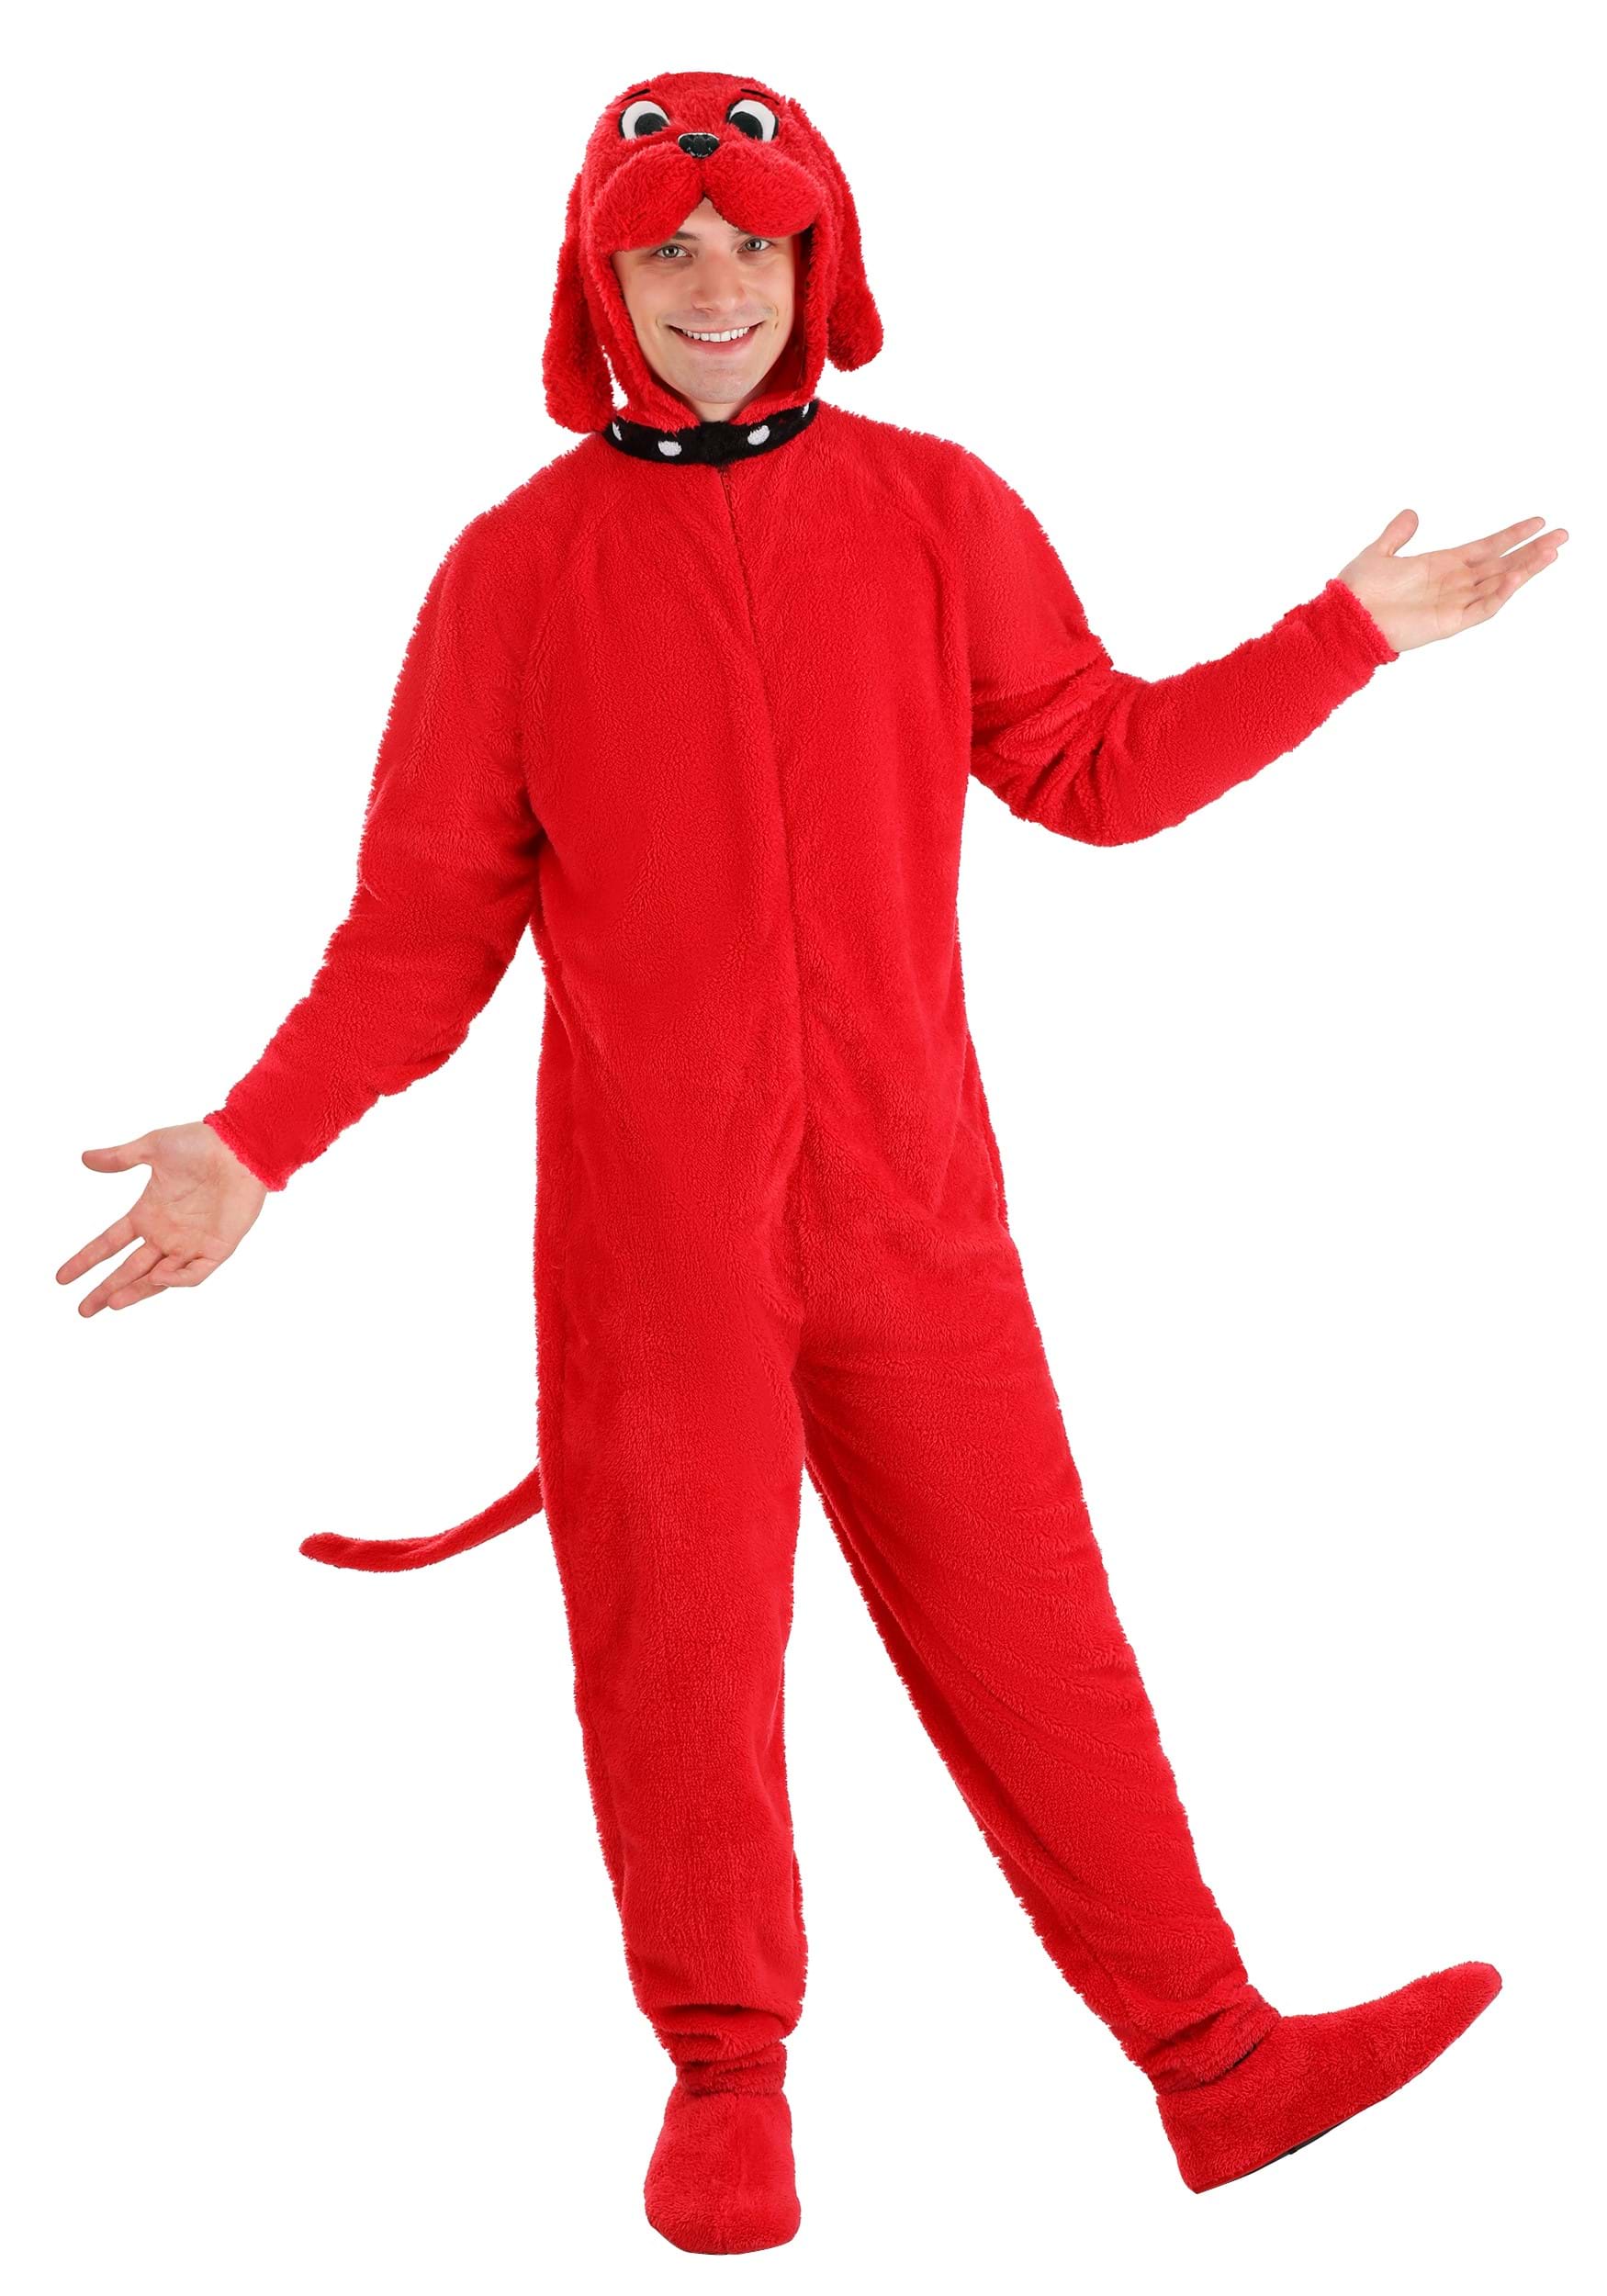 Photos - Fancy Dress Clifford FUN Costumes  the Big Red Dog Costume for Adults Black/Red FUN 